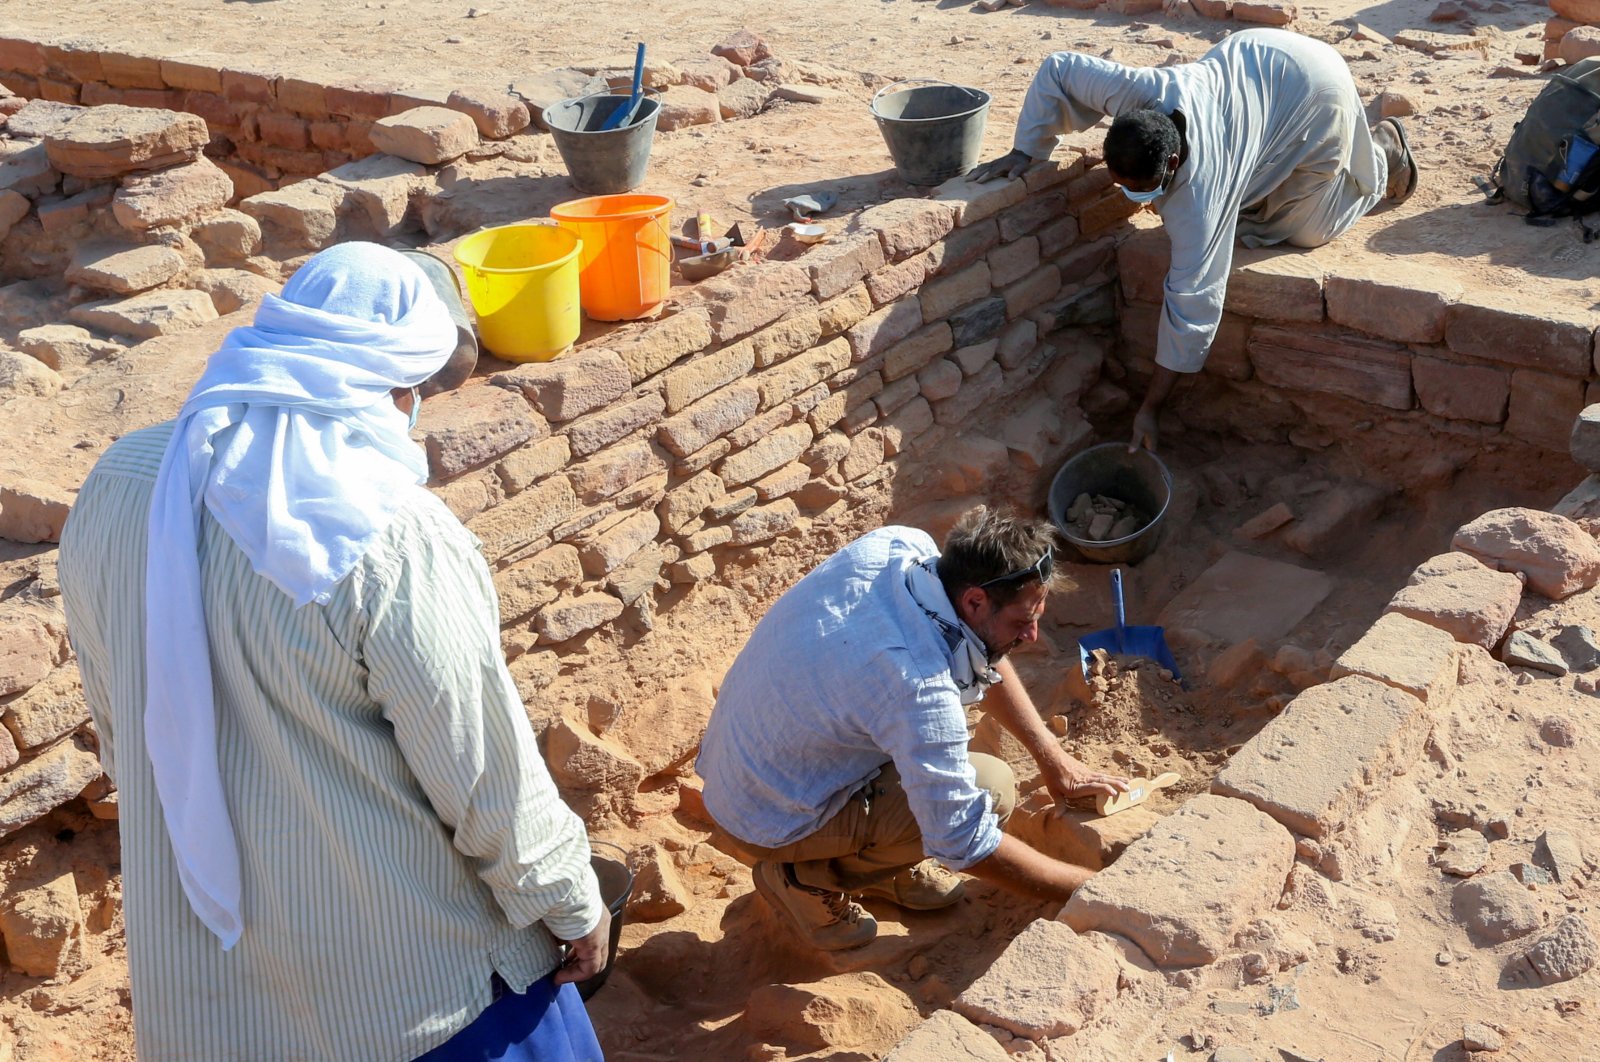 A French archaeologist and his co-workers carefully clean the pottery to examine the findings known to be from the Dadan and Lihyan civilization dated 1,000 B.C., Al-Ula, Saudi Arabia, Oct. 30, 2021. (Reuters Photo)